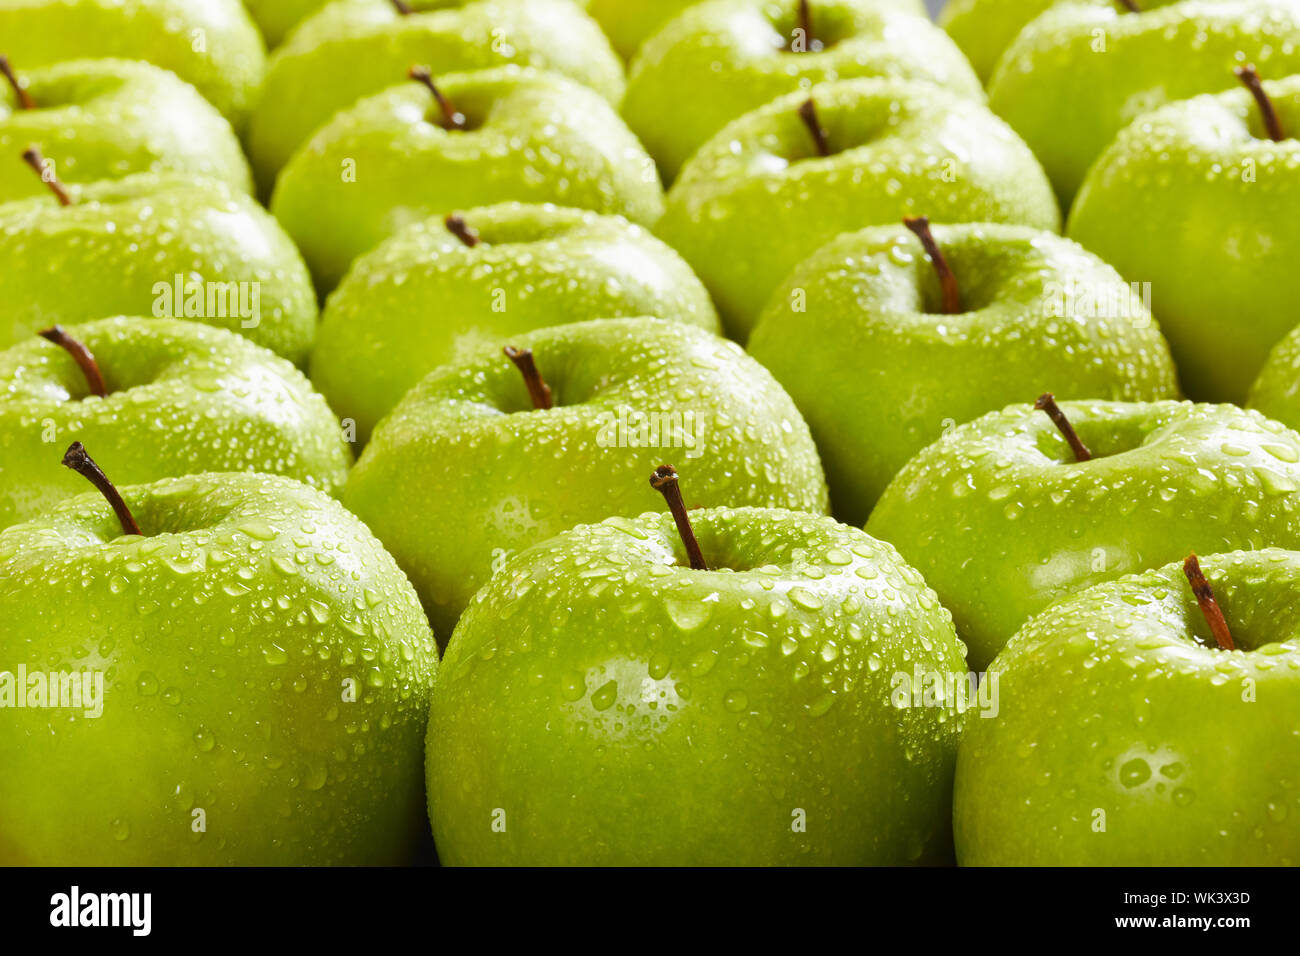 https://c8.alamy.com/comp/WK3X3D/large-group-of-granny-smith-apples-in-a-row-selective-focus-WK3X3D.jpg